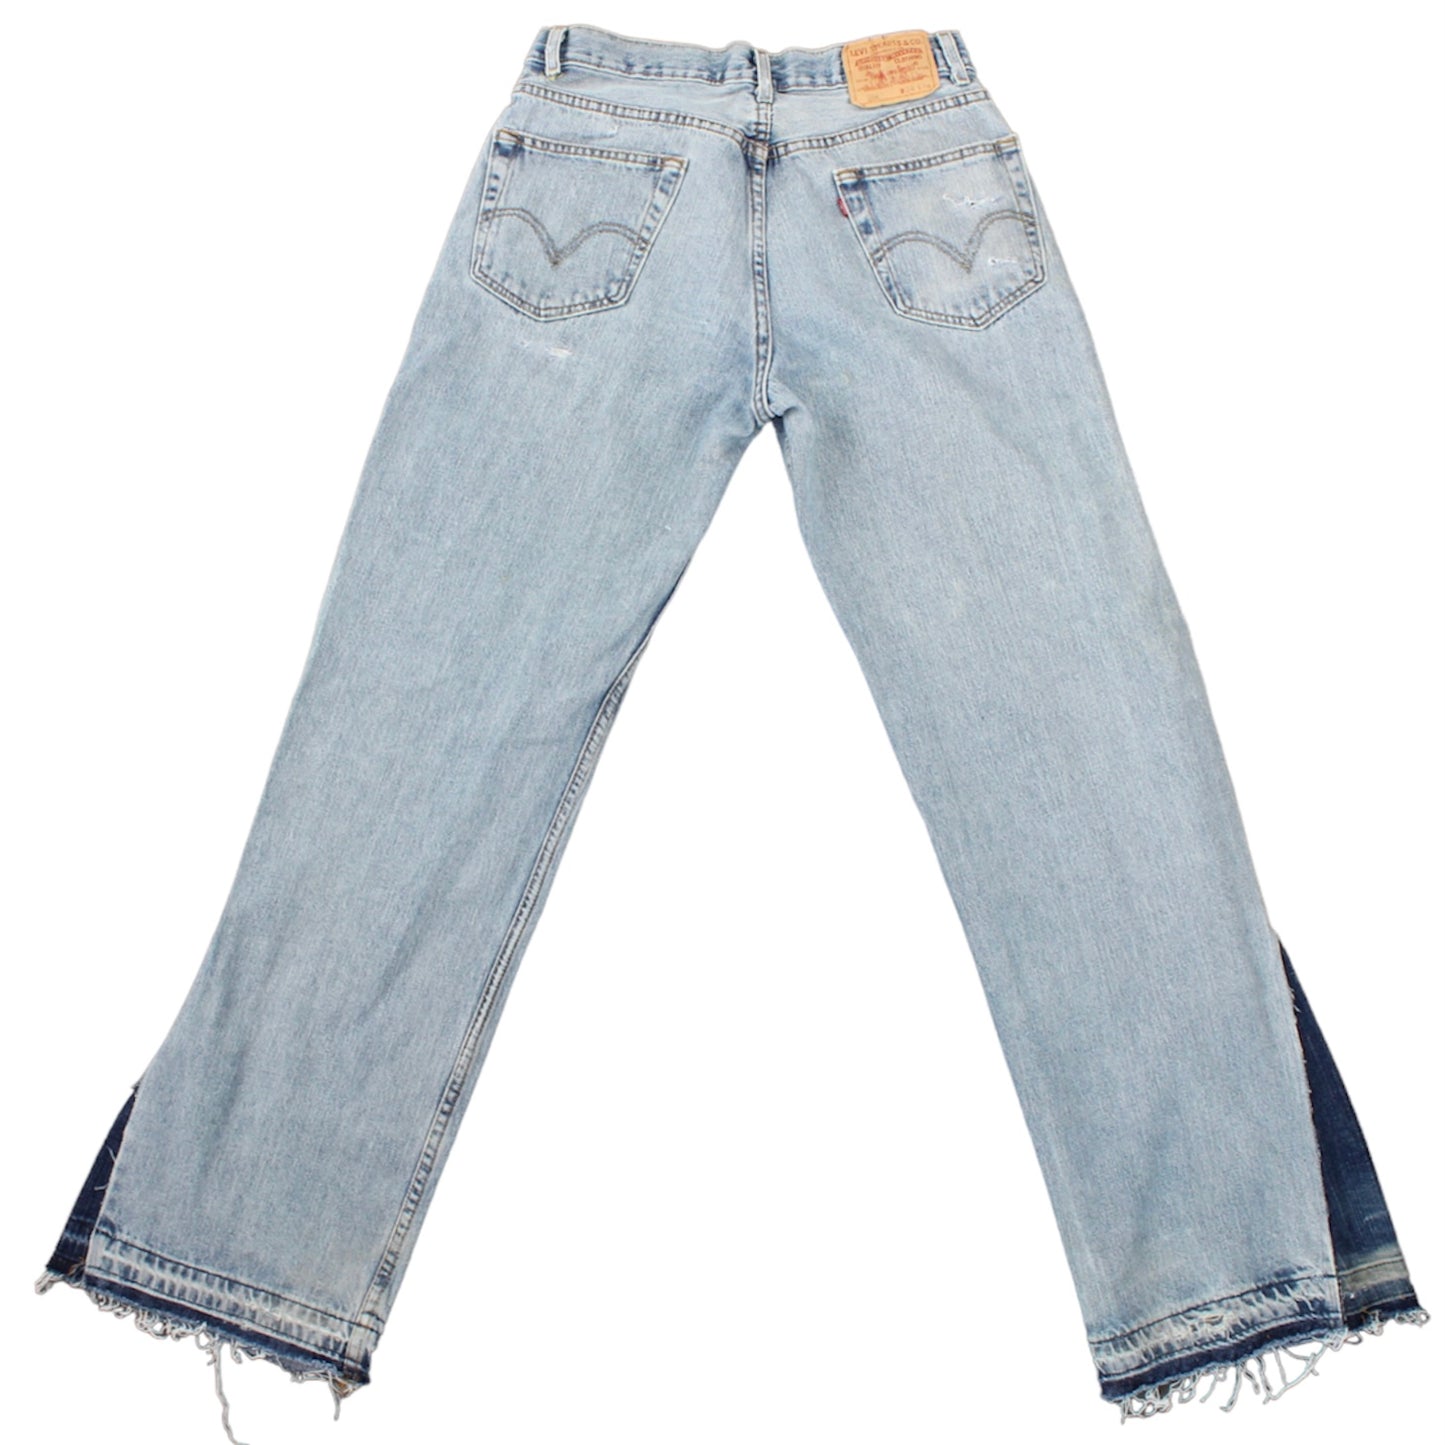 Reworked Flare Levi’s